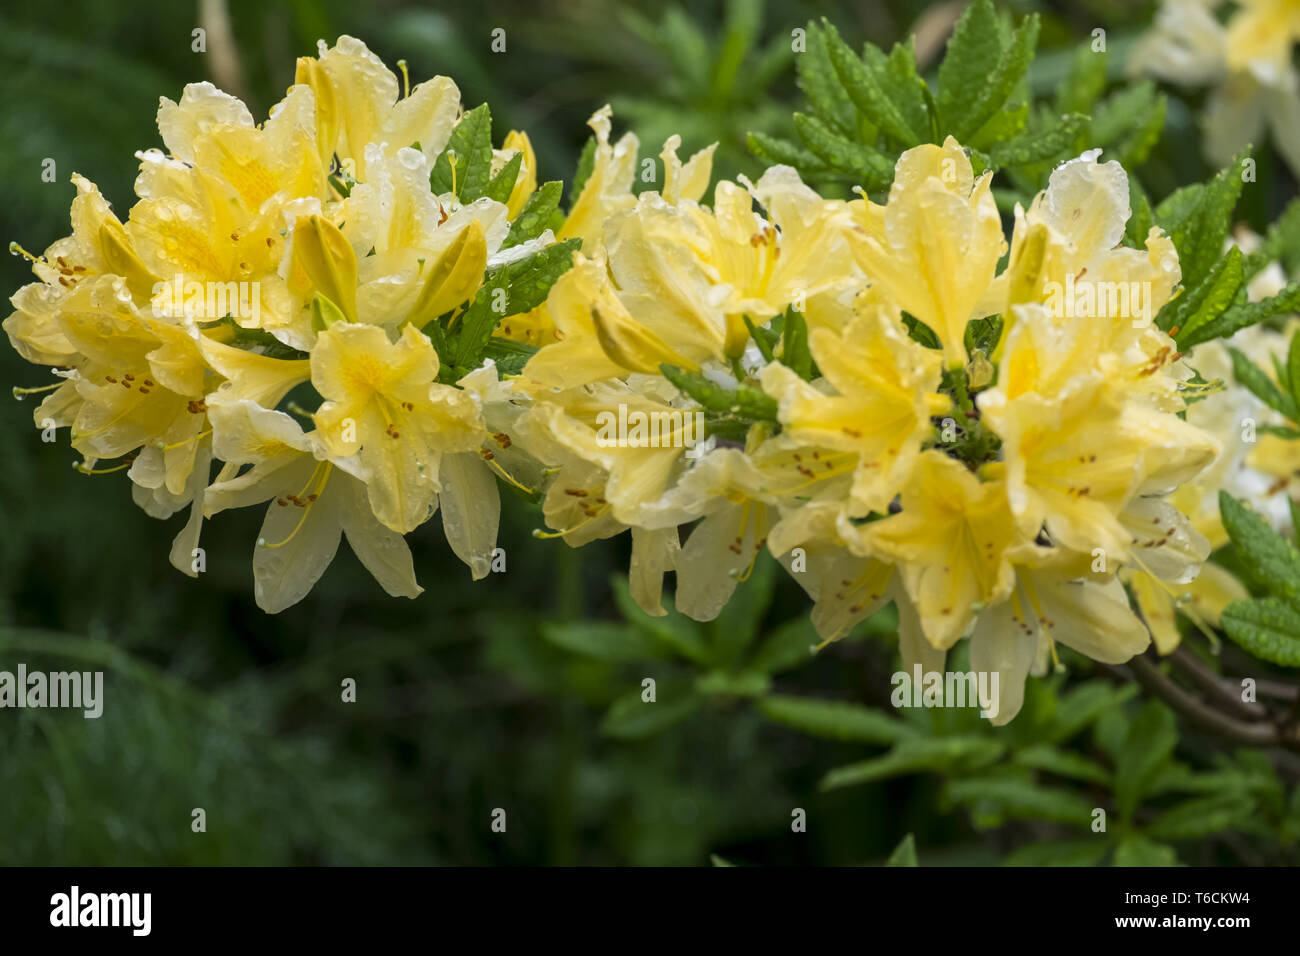 Yellow scented nose with regent drops Stock Photo